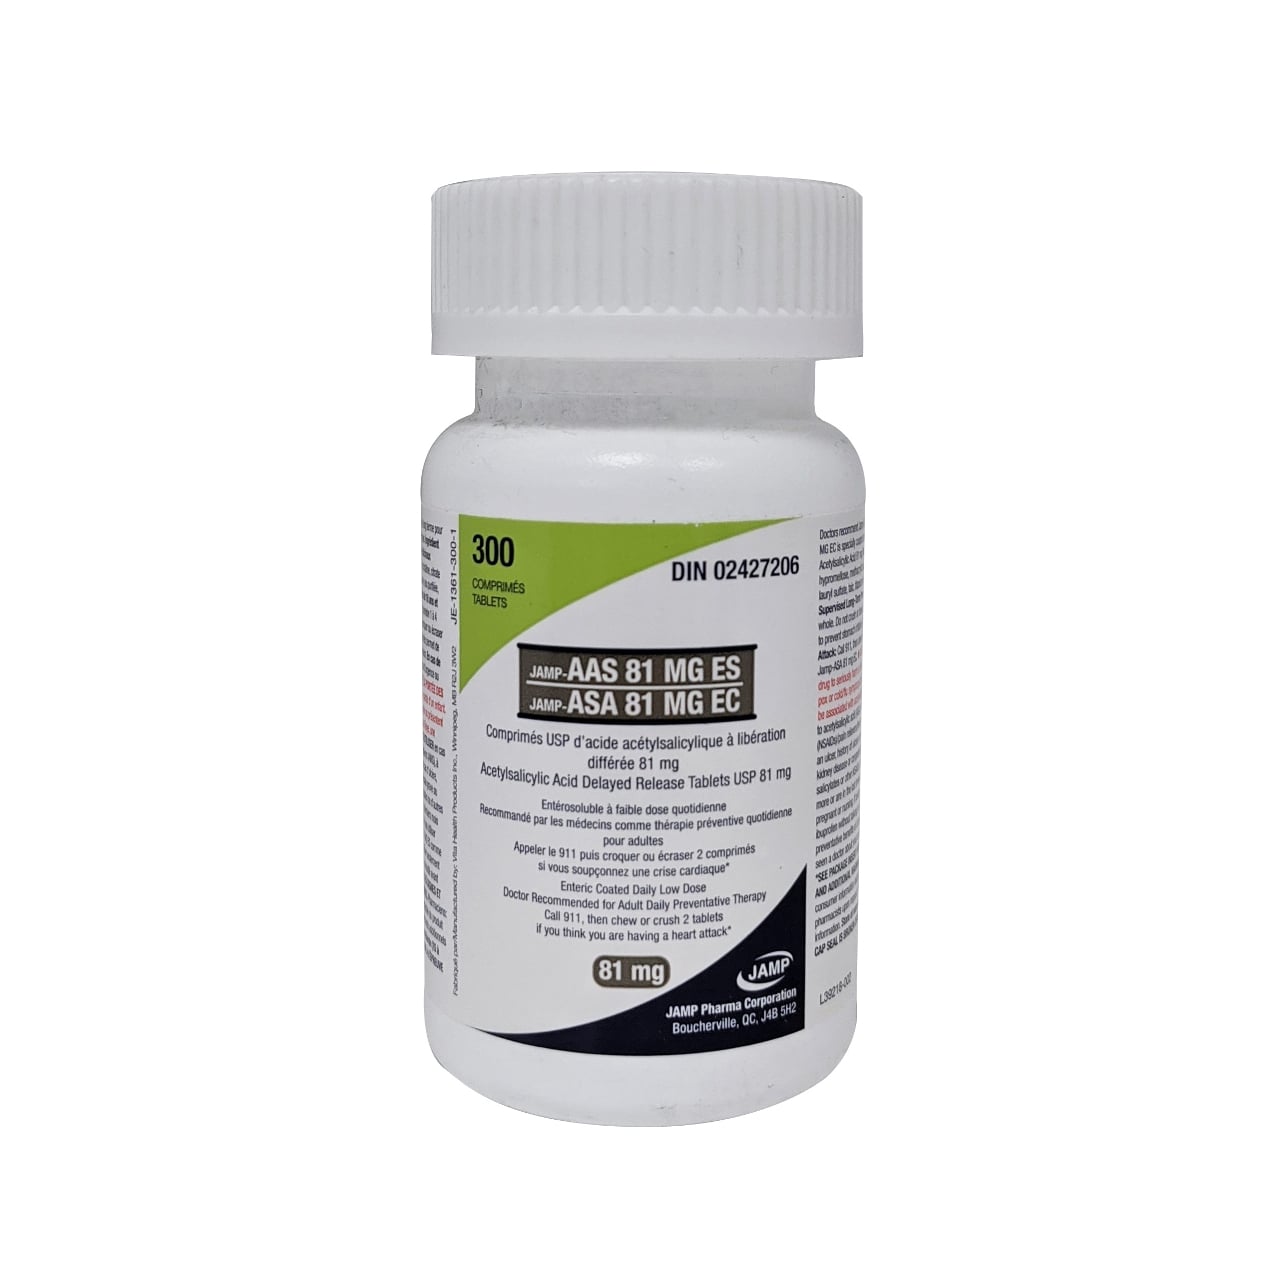 Product label for JAMP Acetylsalicylic Acid 81mg Delayed Release Tablets in English and French